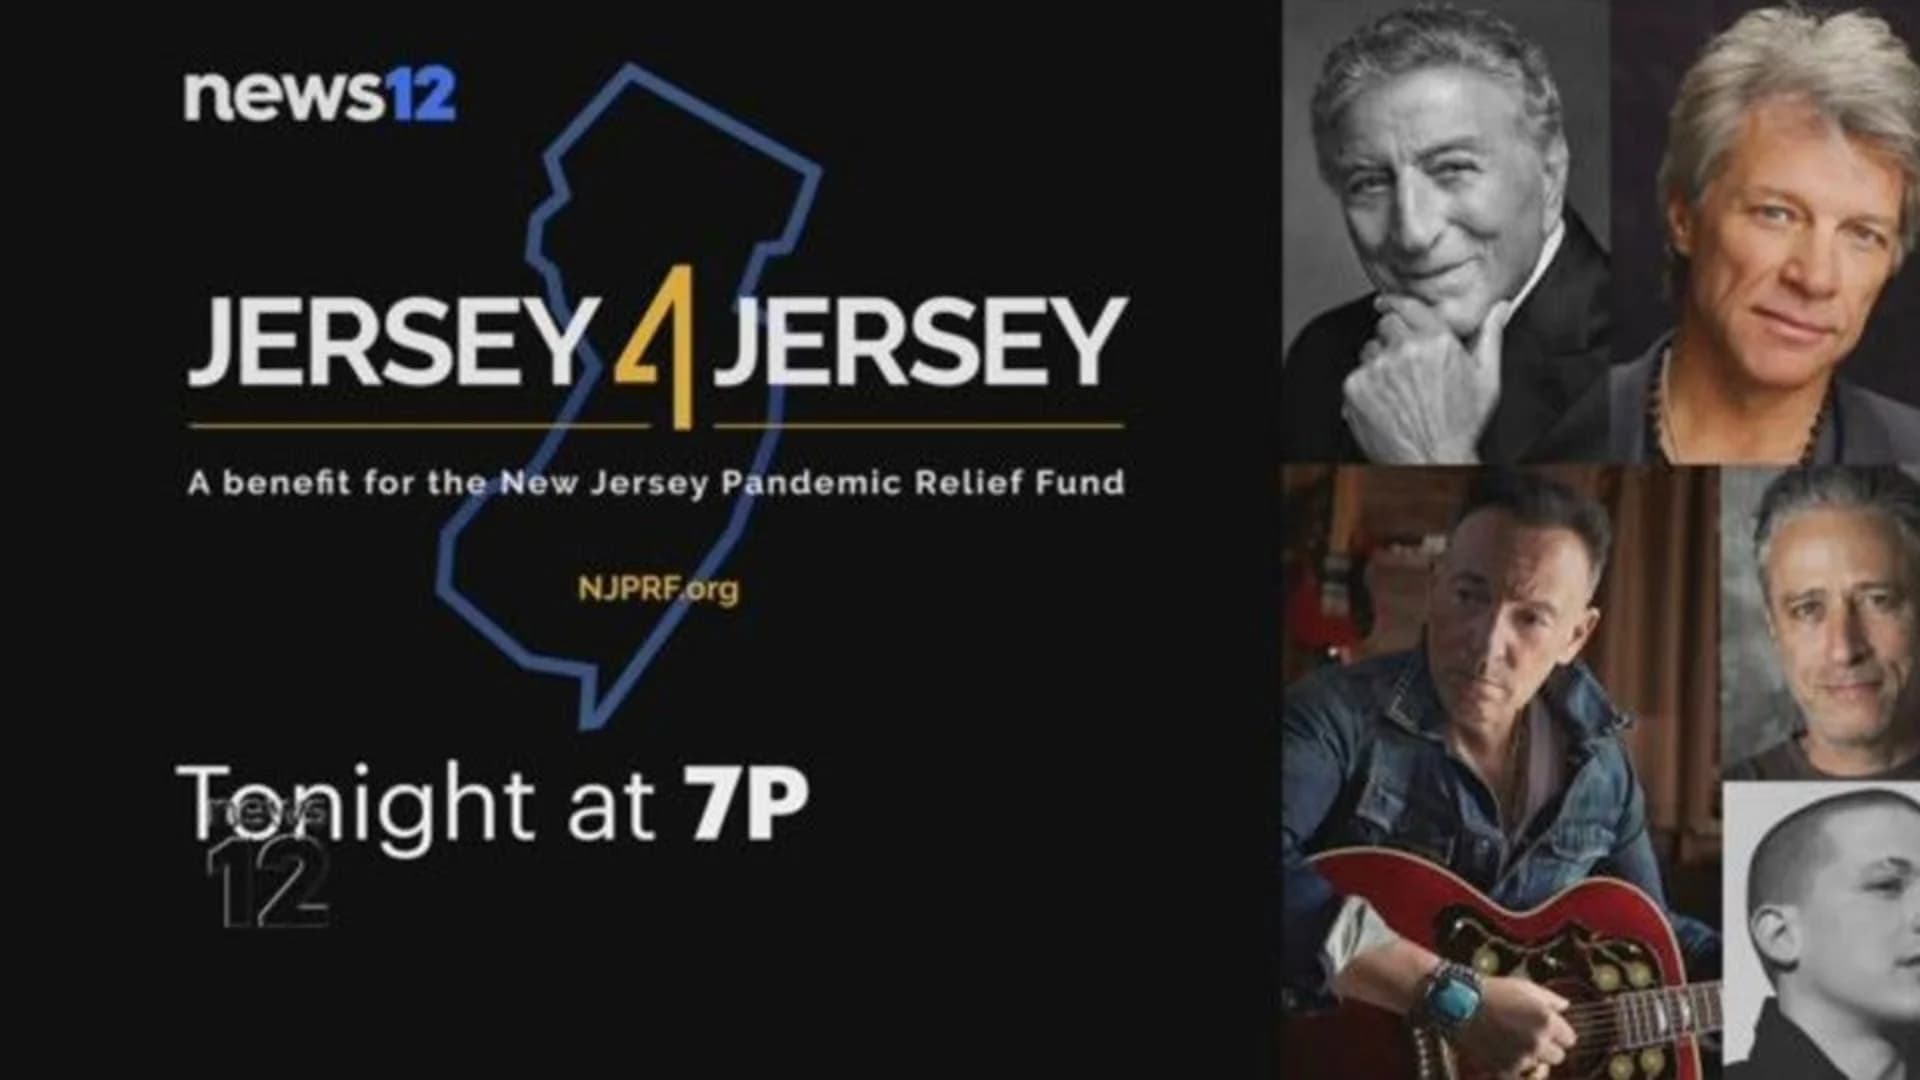 WATCH: 'Jersey 4 Jersey' NJ Pandemic Relief Fund benefit concert